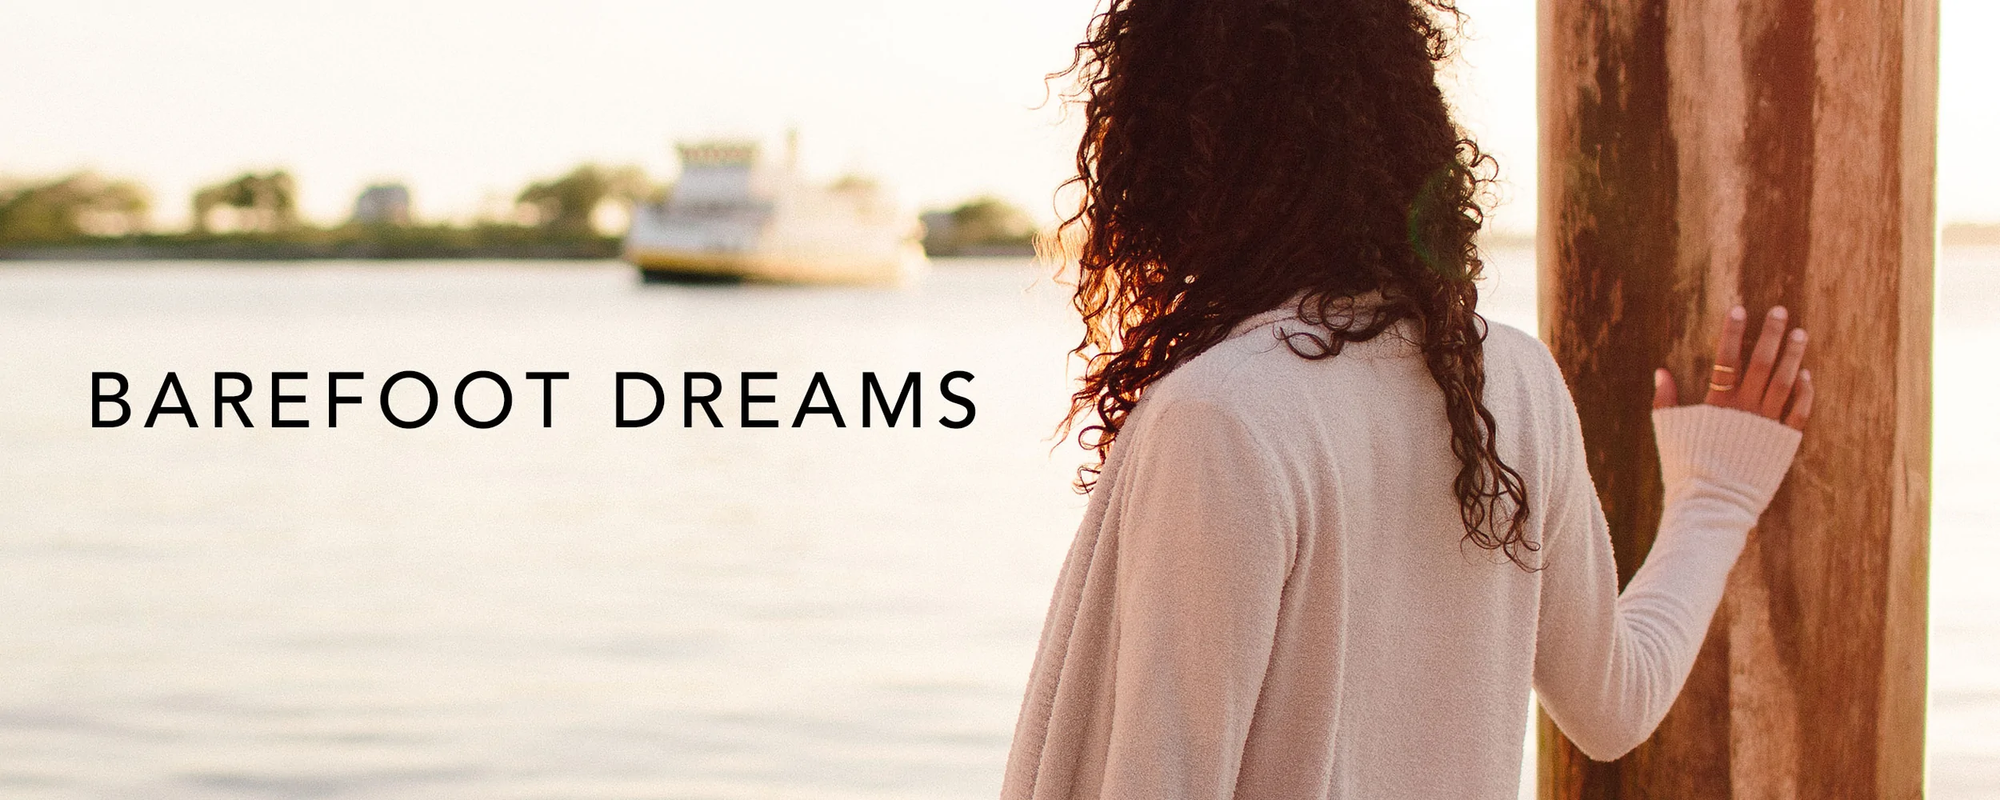 Barefoot Dreams > Pullovers